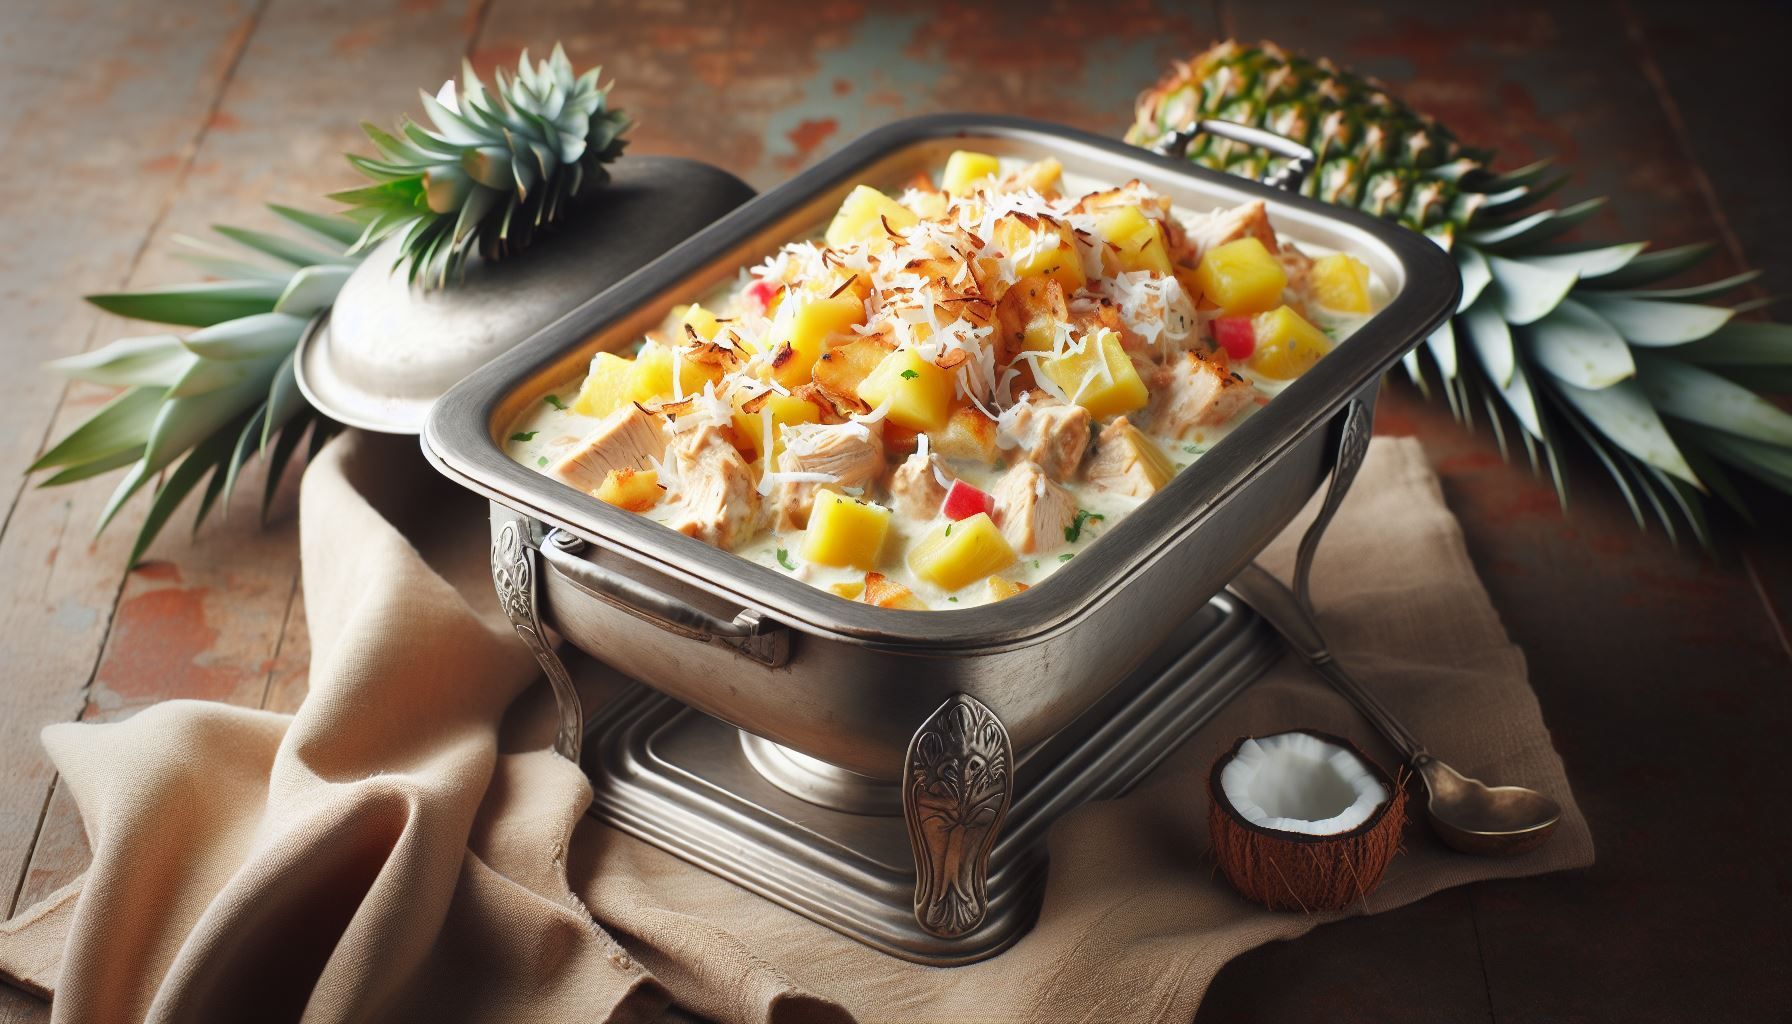 A casserole dish filled with pineapple and coconut on a wooden table.